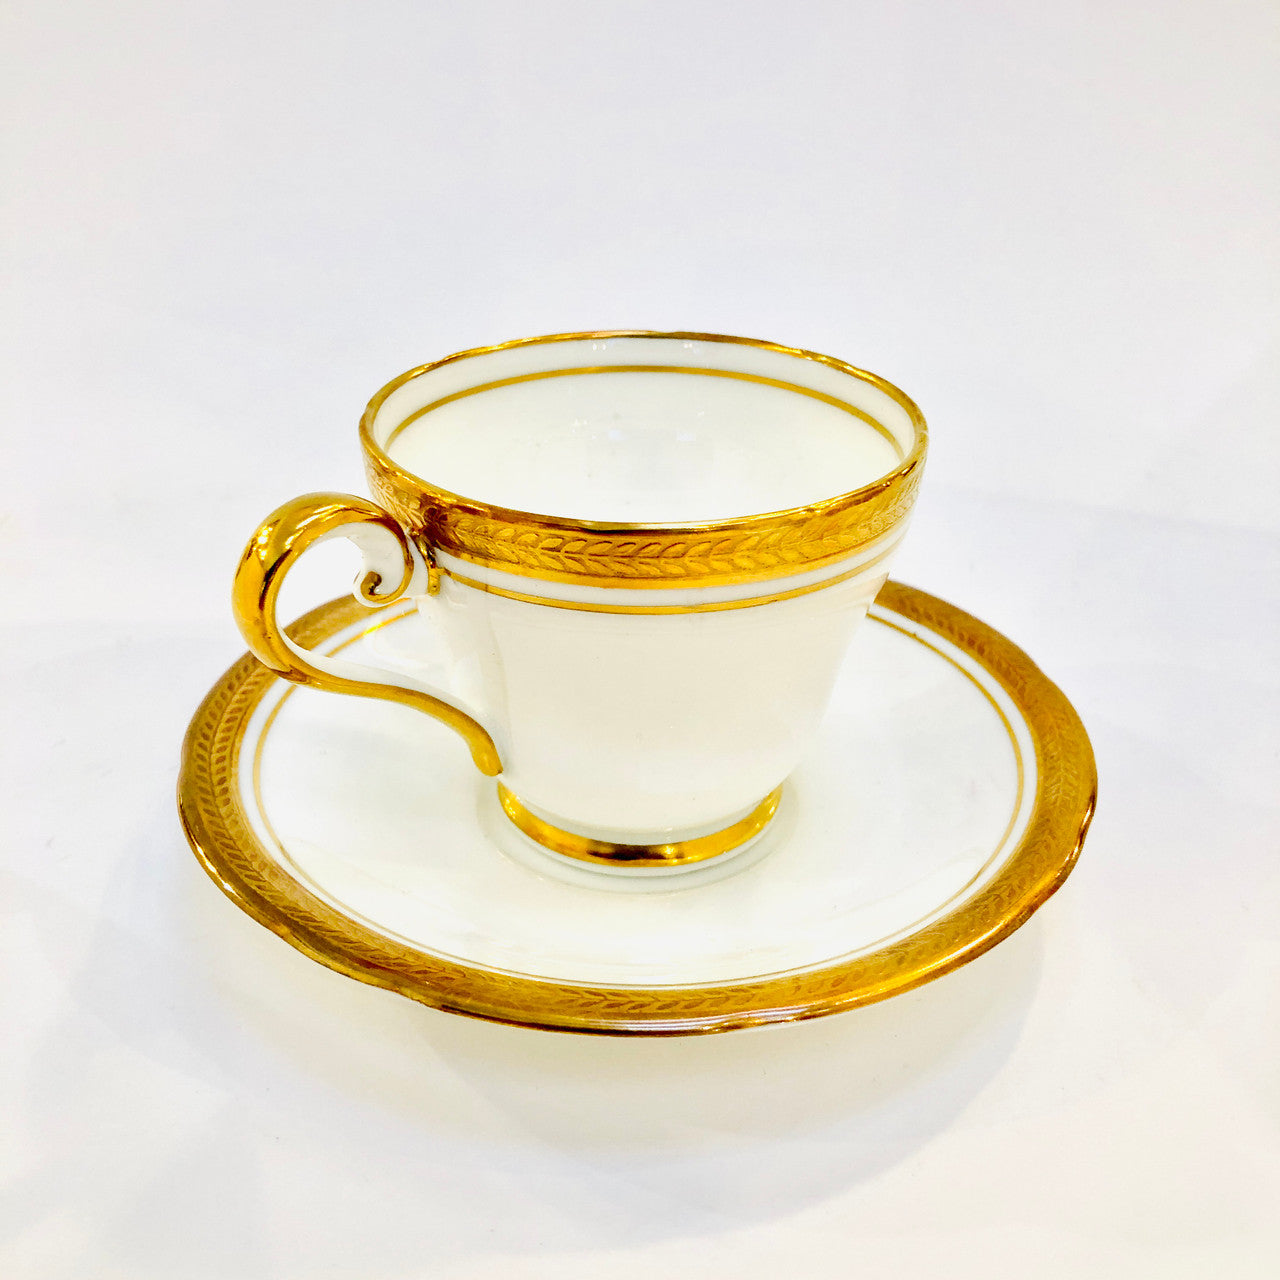 New Bone China - Not just any old porcelain, The Tea Centre